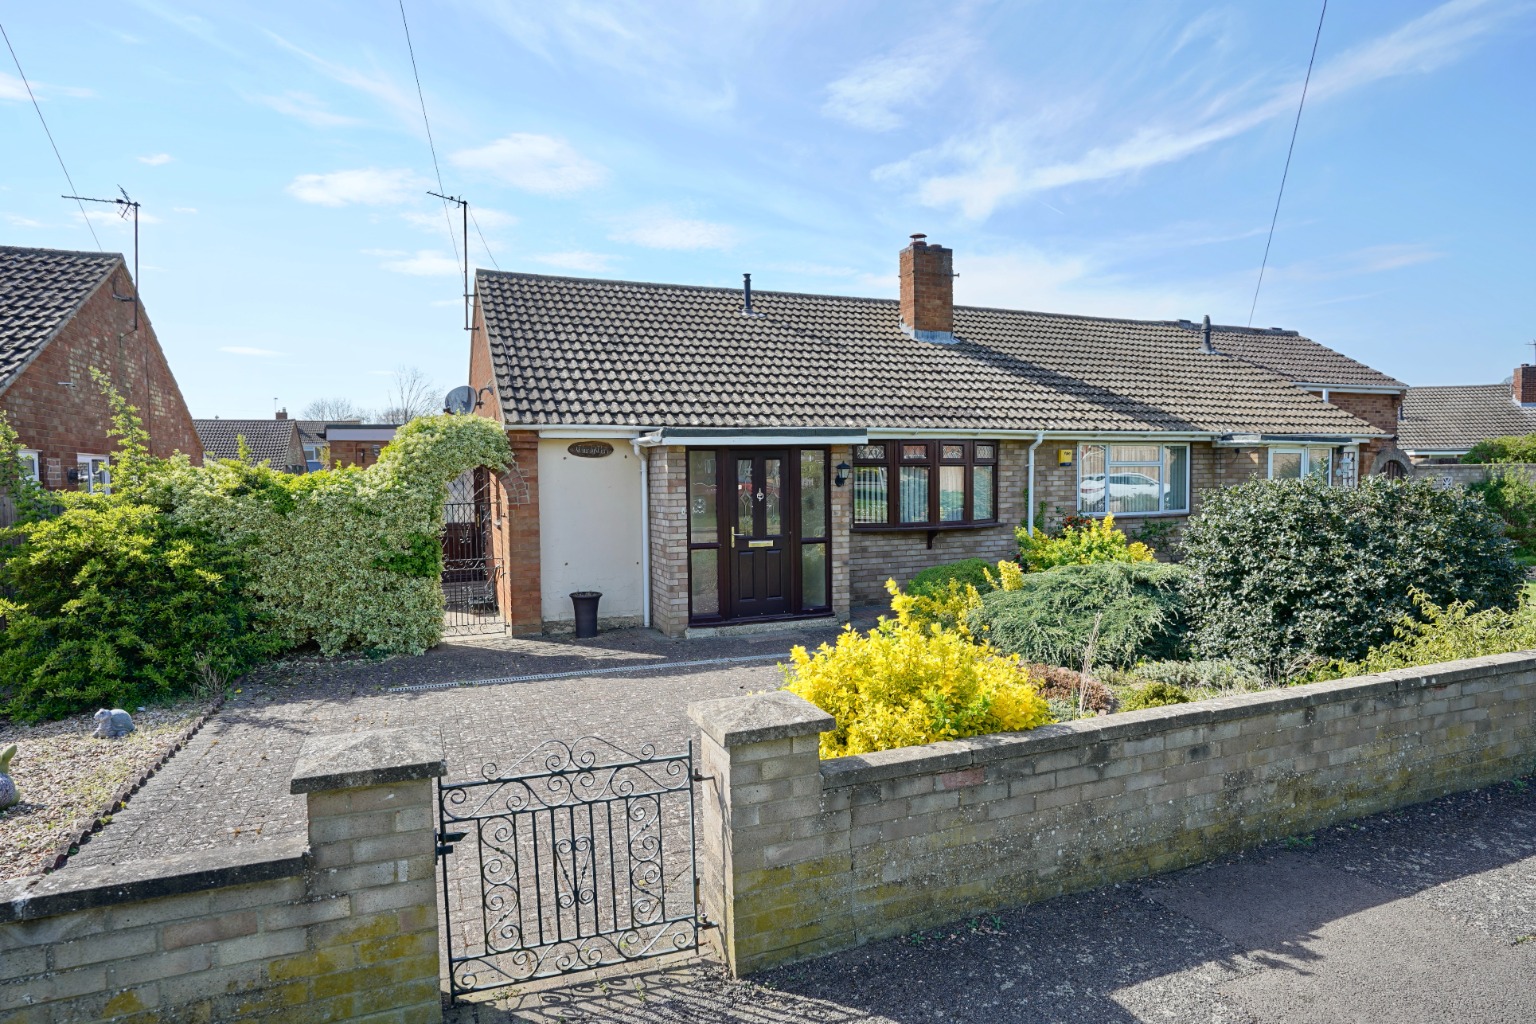 **Guide Price of £325,000 - £350,000** We're delighted to offer for sale this well presented, extended semi-detached bungalow situated within a sought after part of St Neots - close to the town, bus stops, shops and the Priory park.